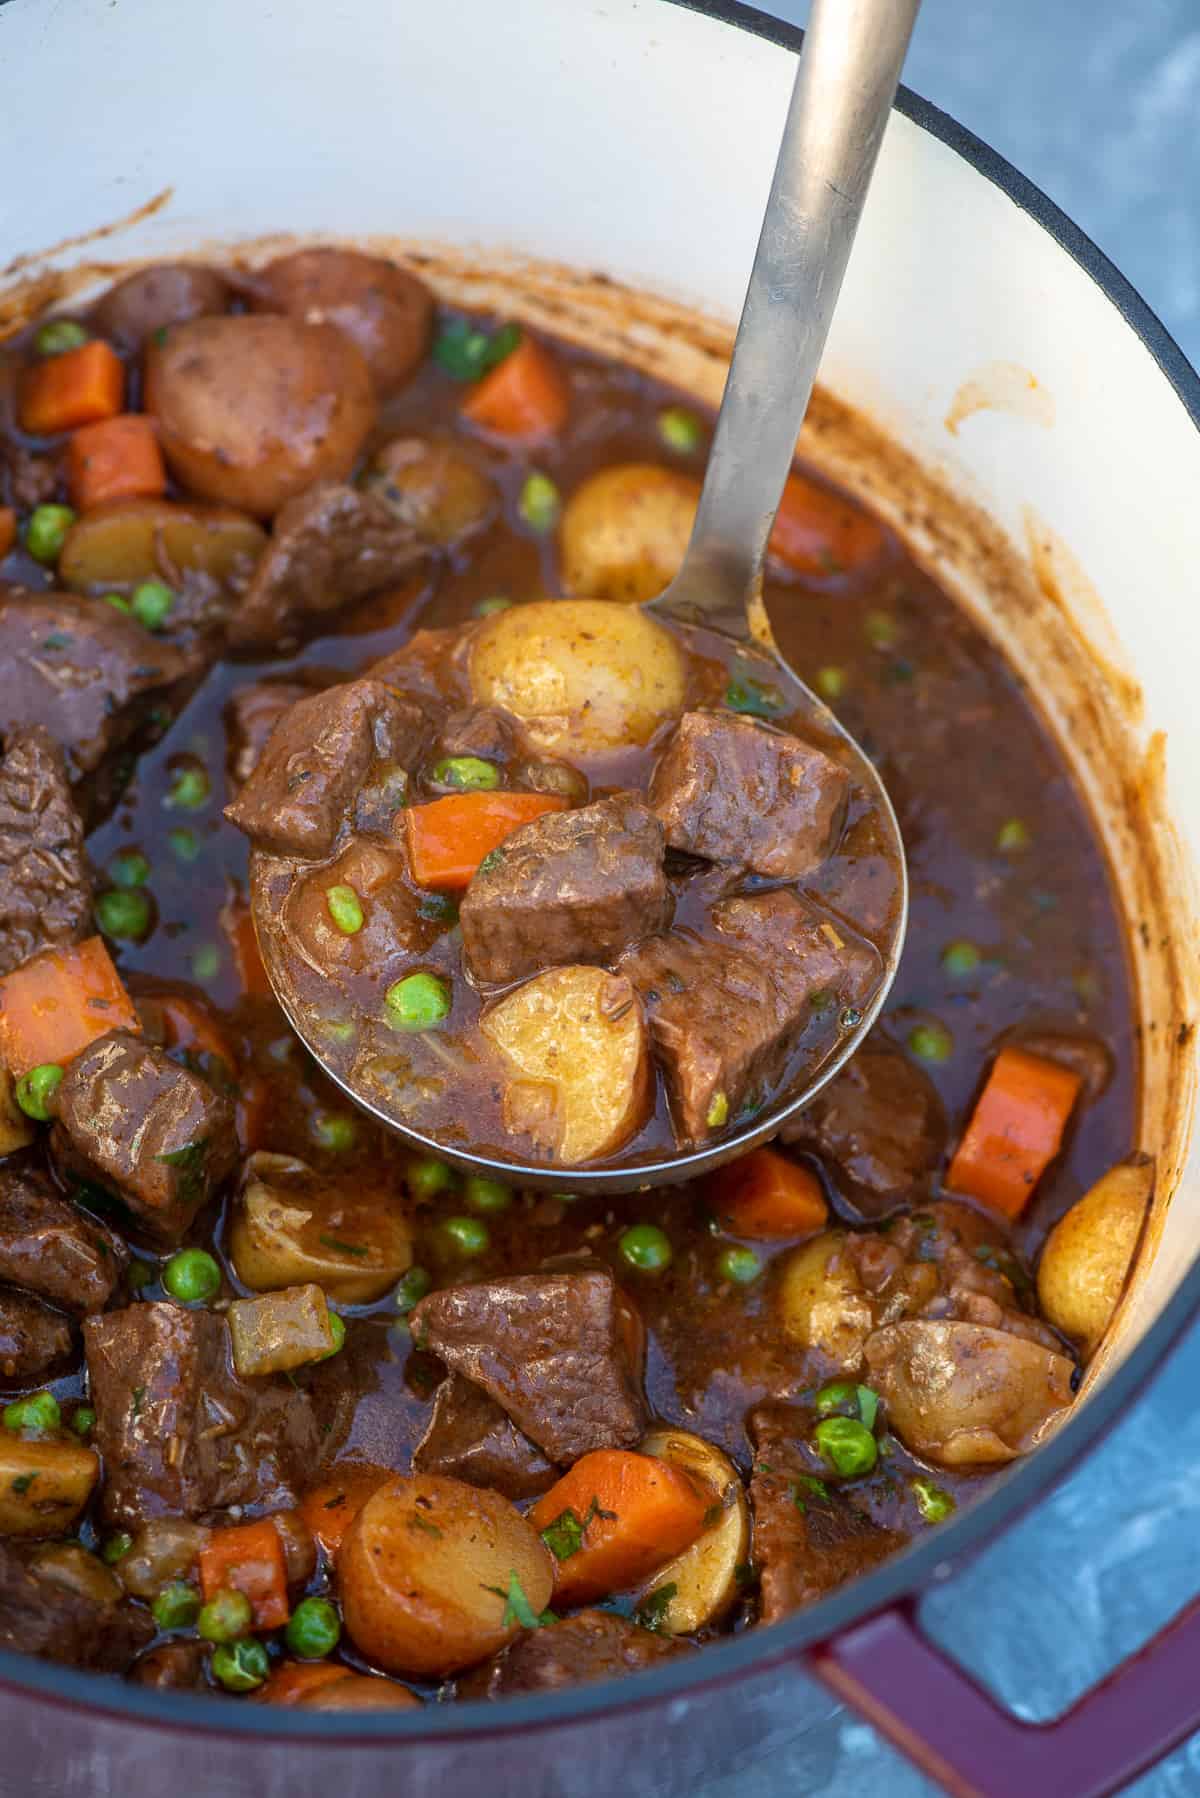 A ladle scooping beef stew from a pot.